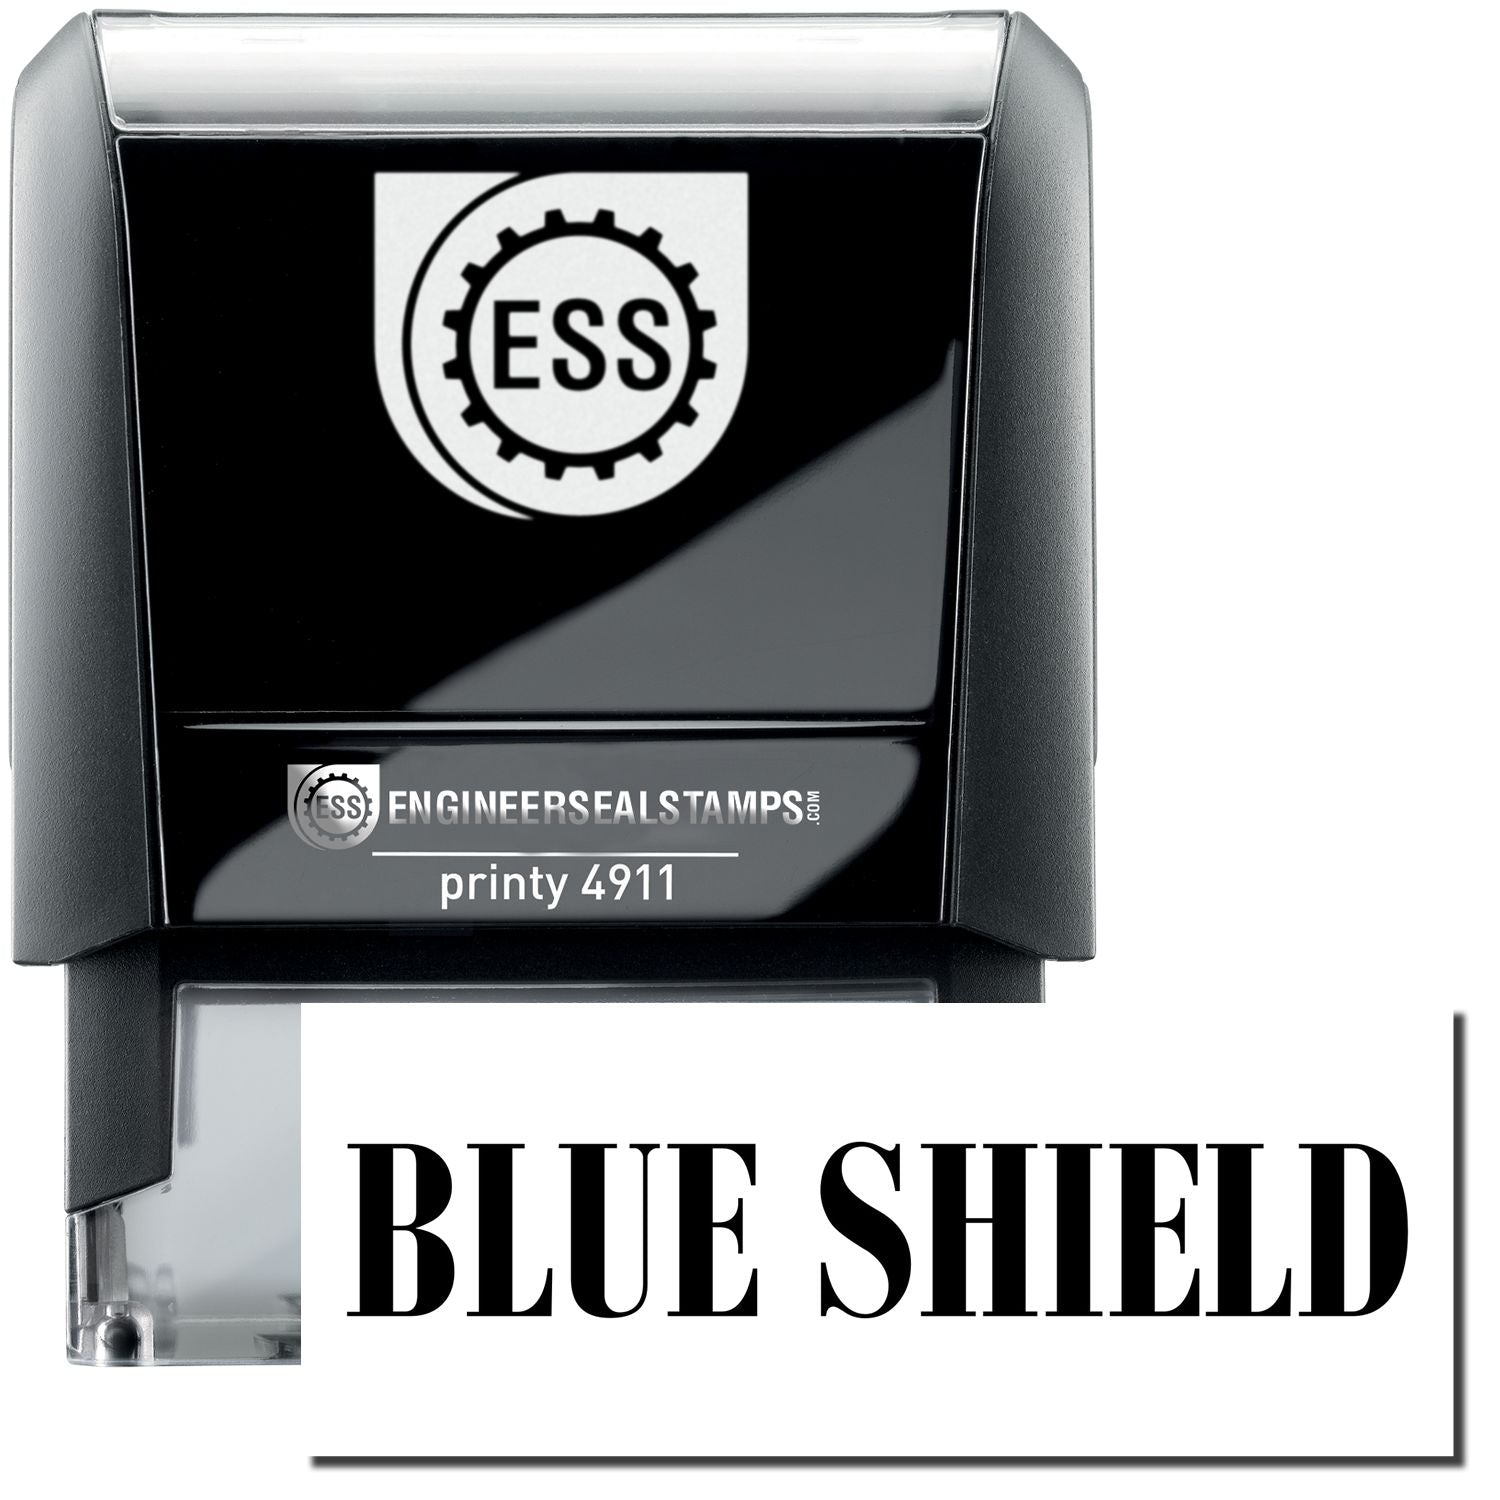 A self-inking stamp with a stamped image showing how the text "BLUE SHIELD" is displayed after stamping.